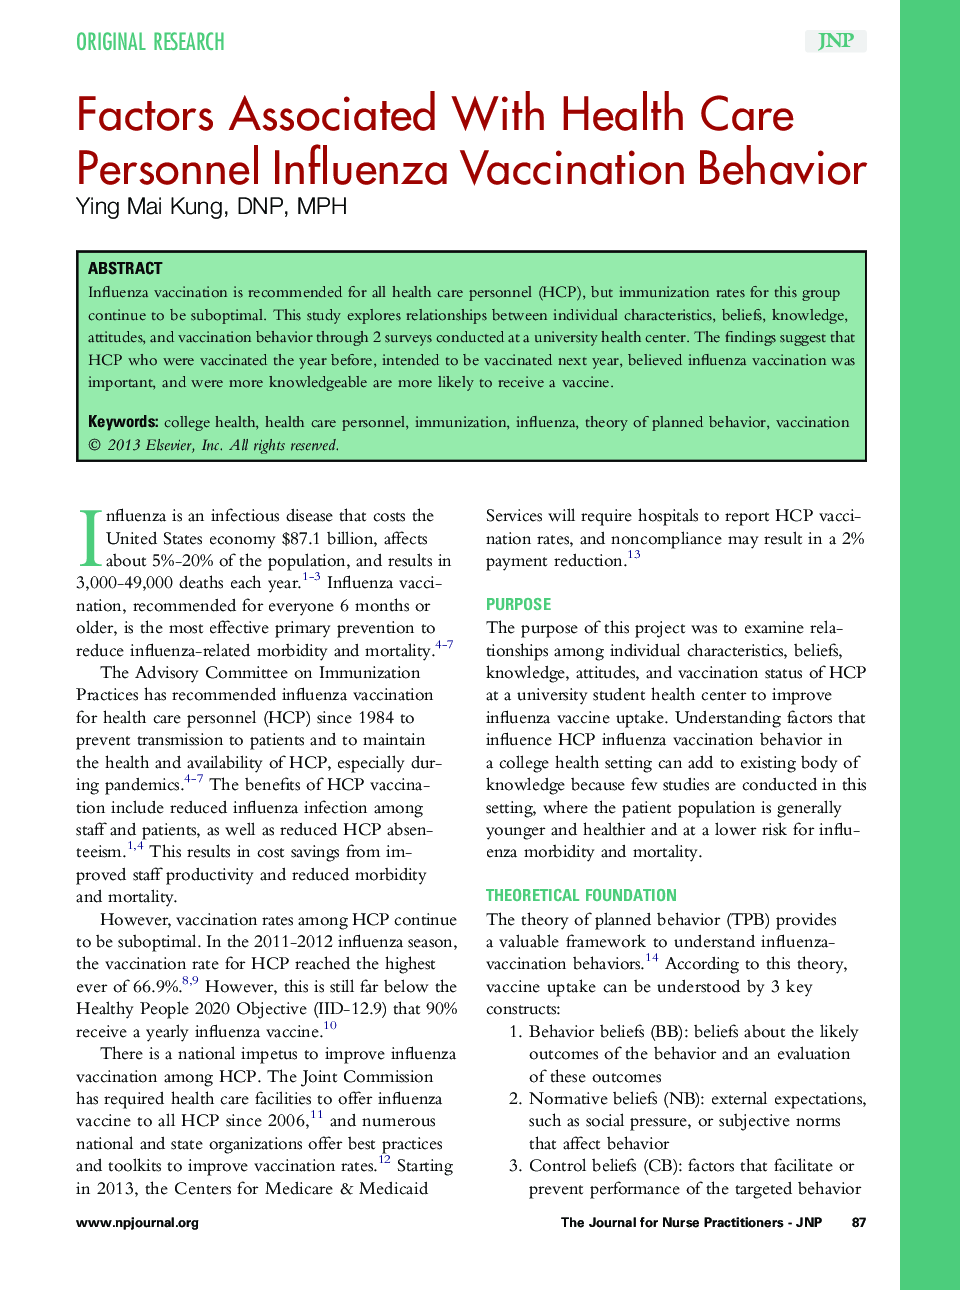 Factors Associated With Health Care Personnel Influenza Vaccination Behavior 